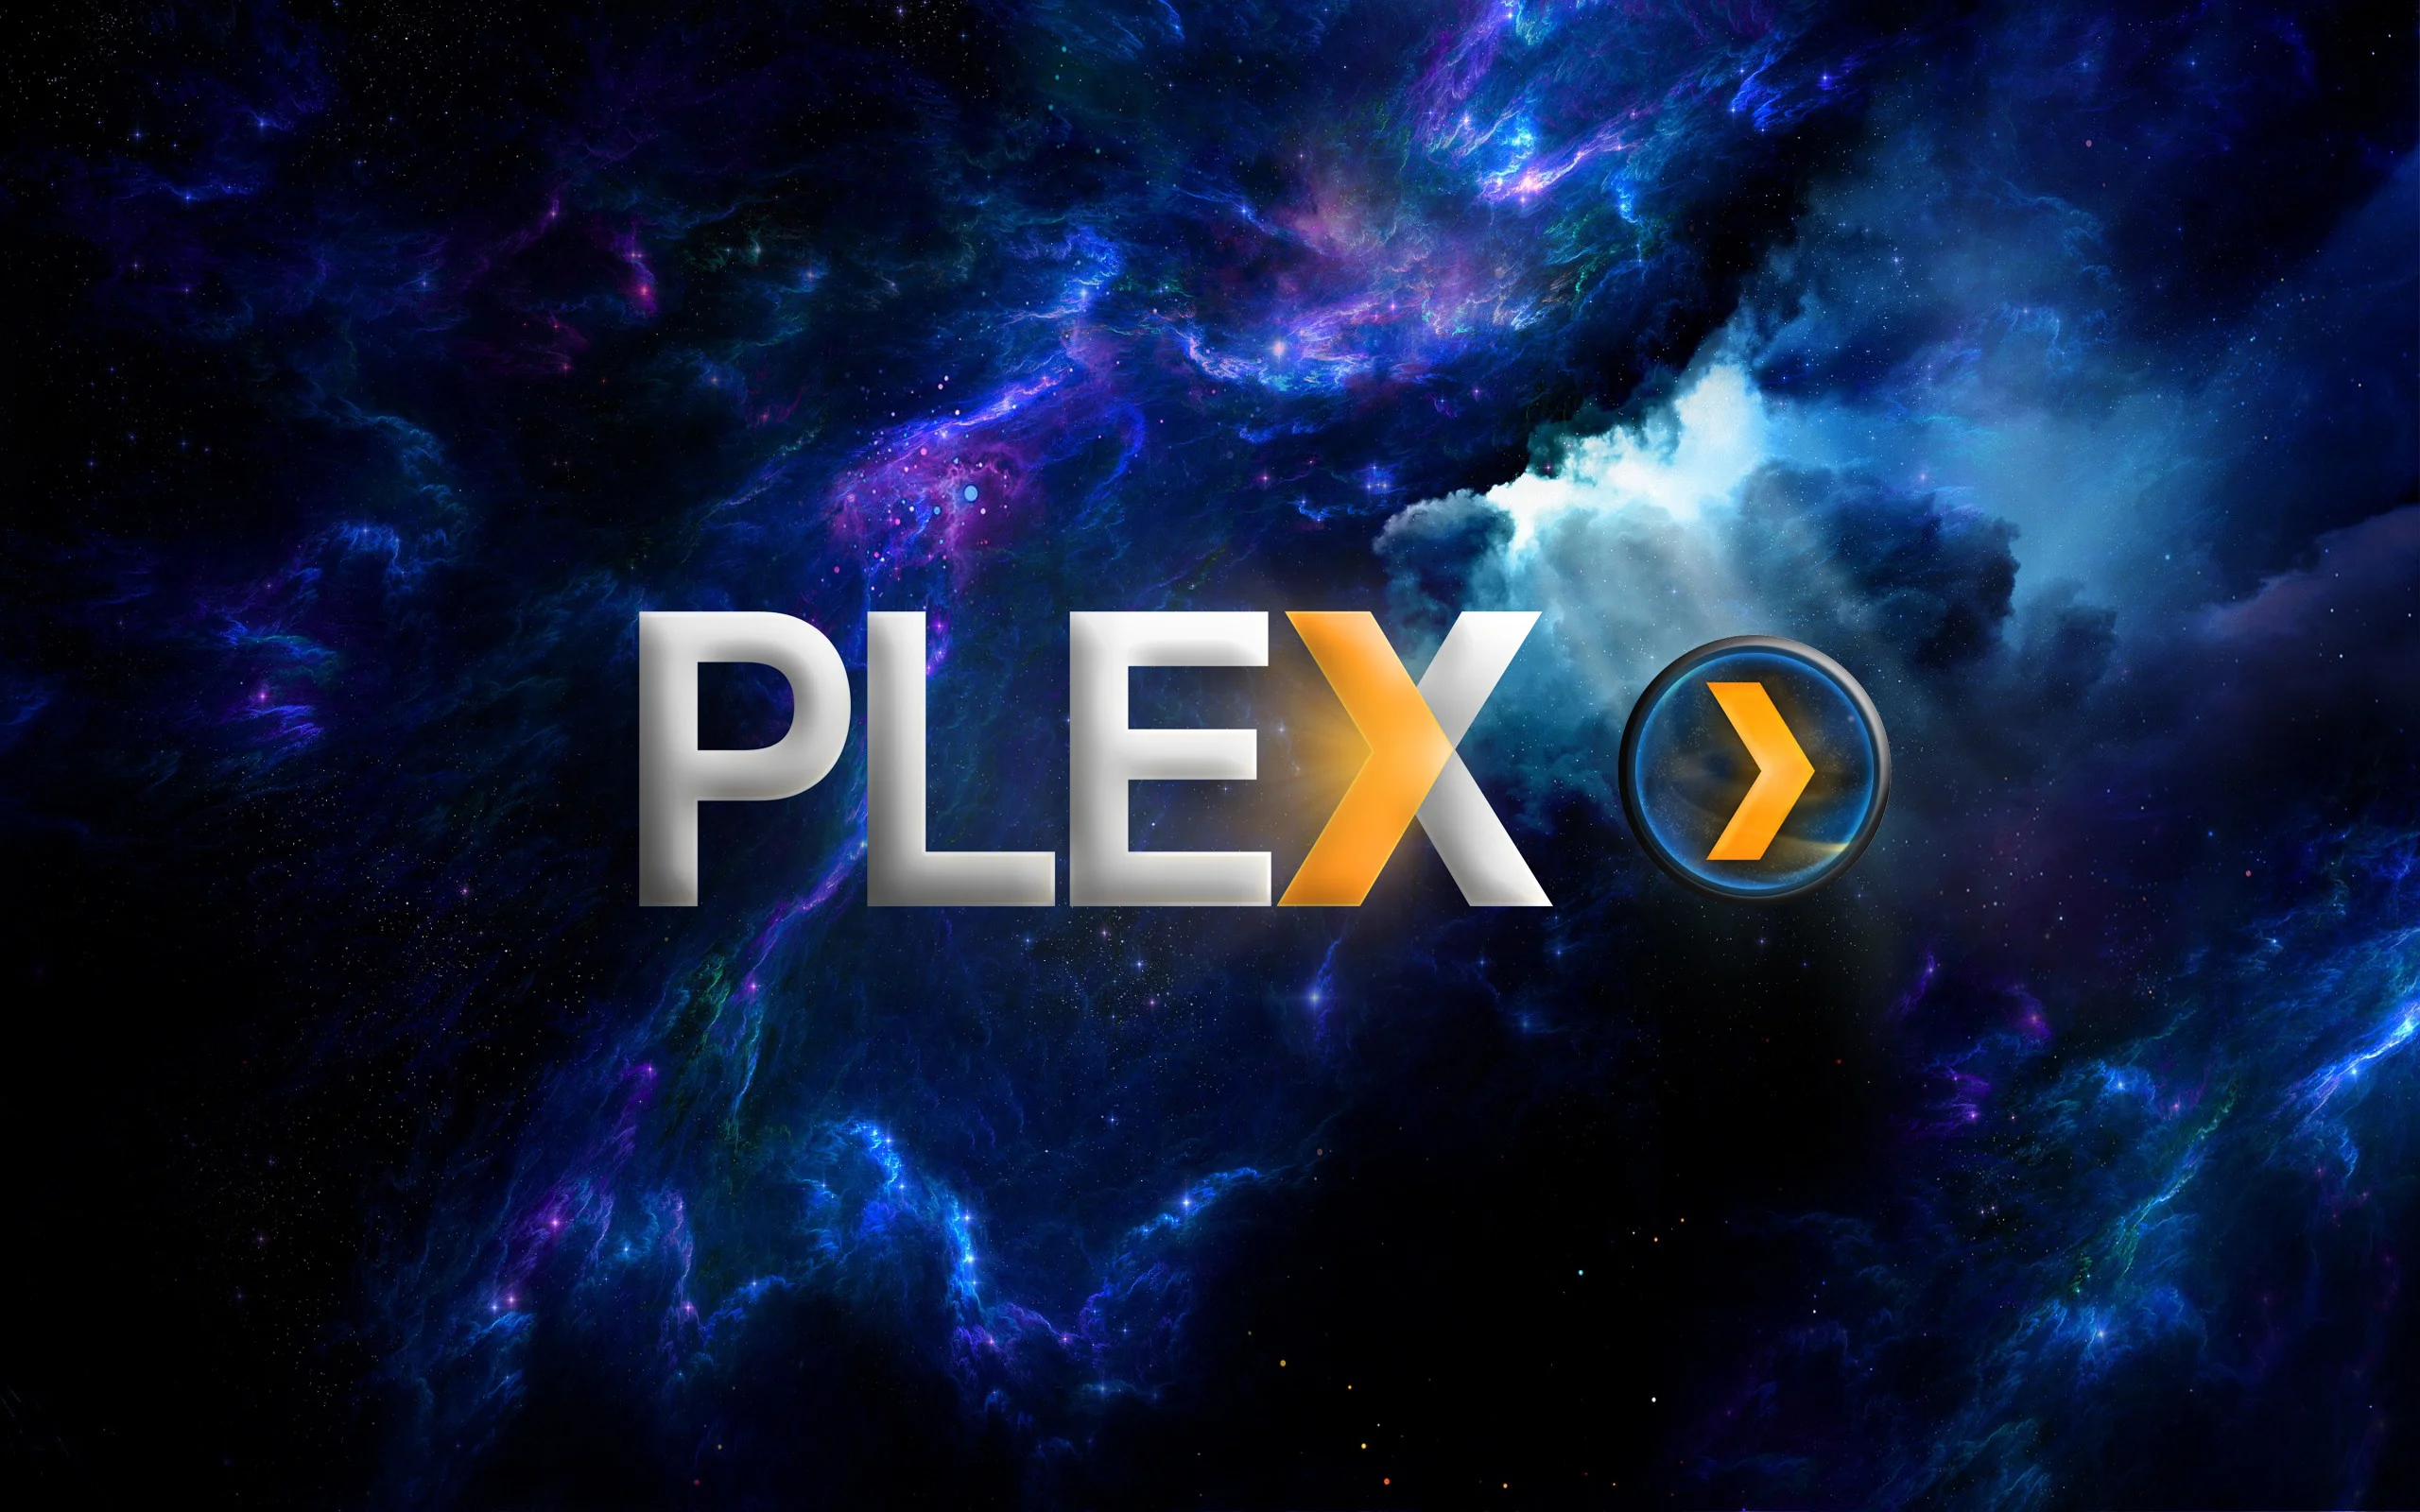 TipsMade a Plex wallpaper, thought I would share –